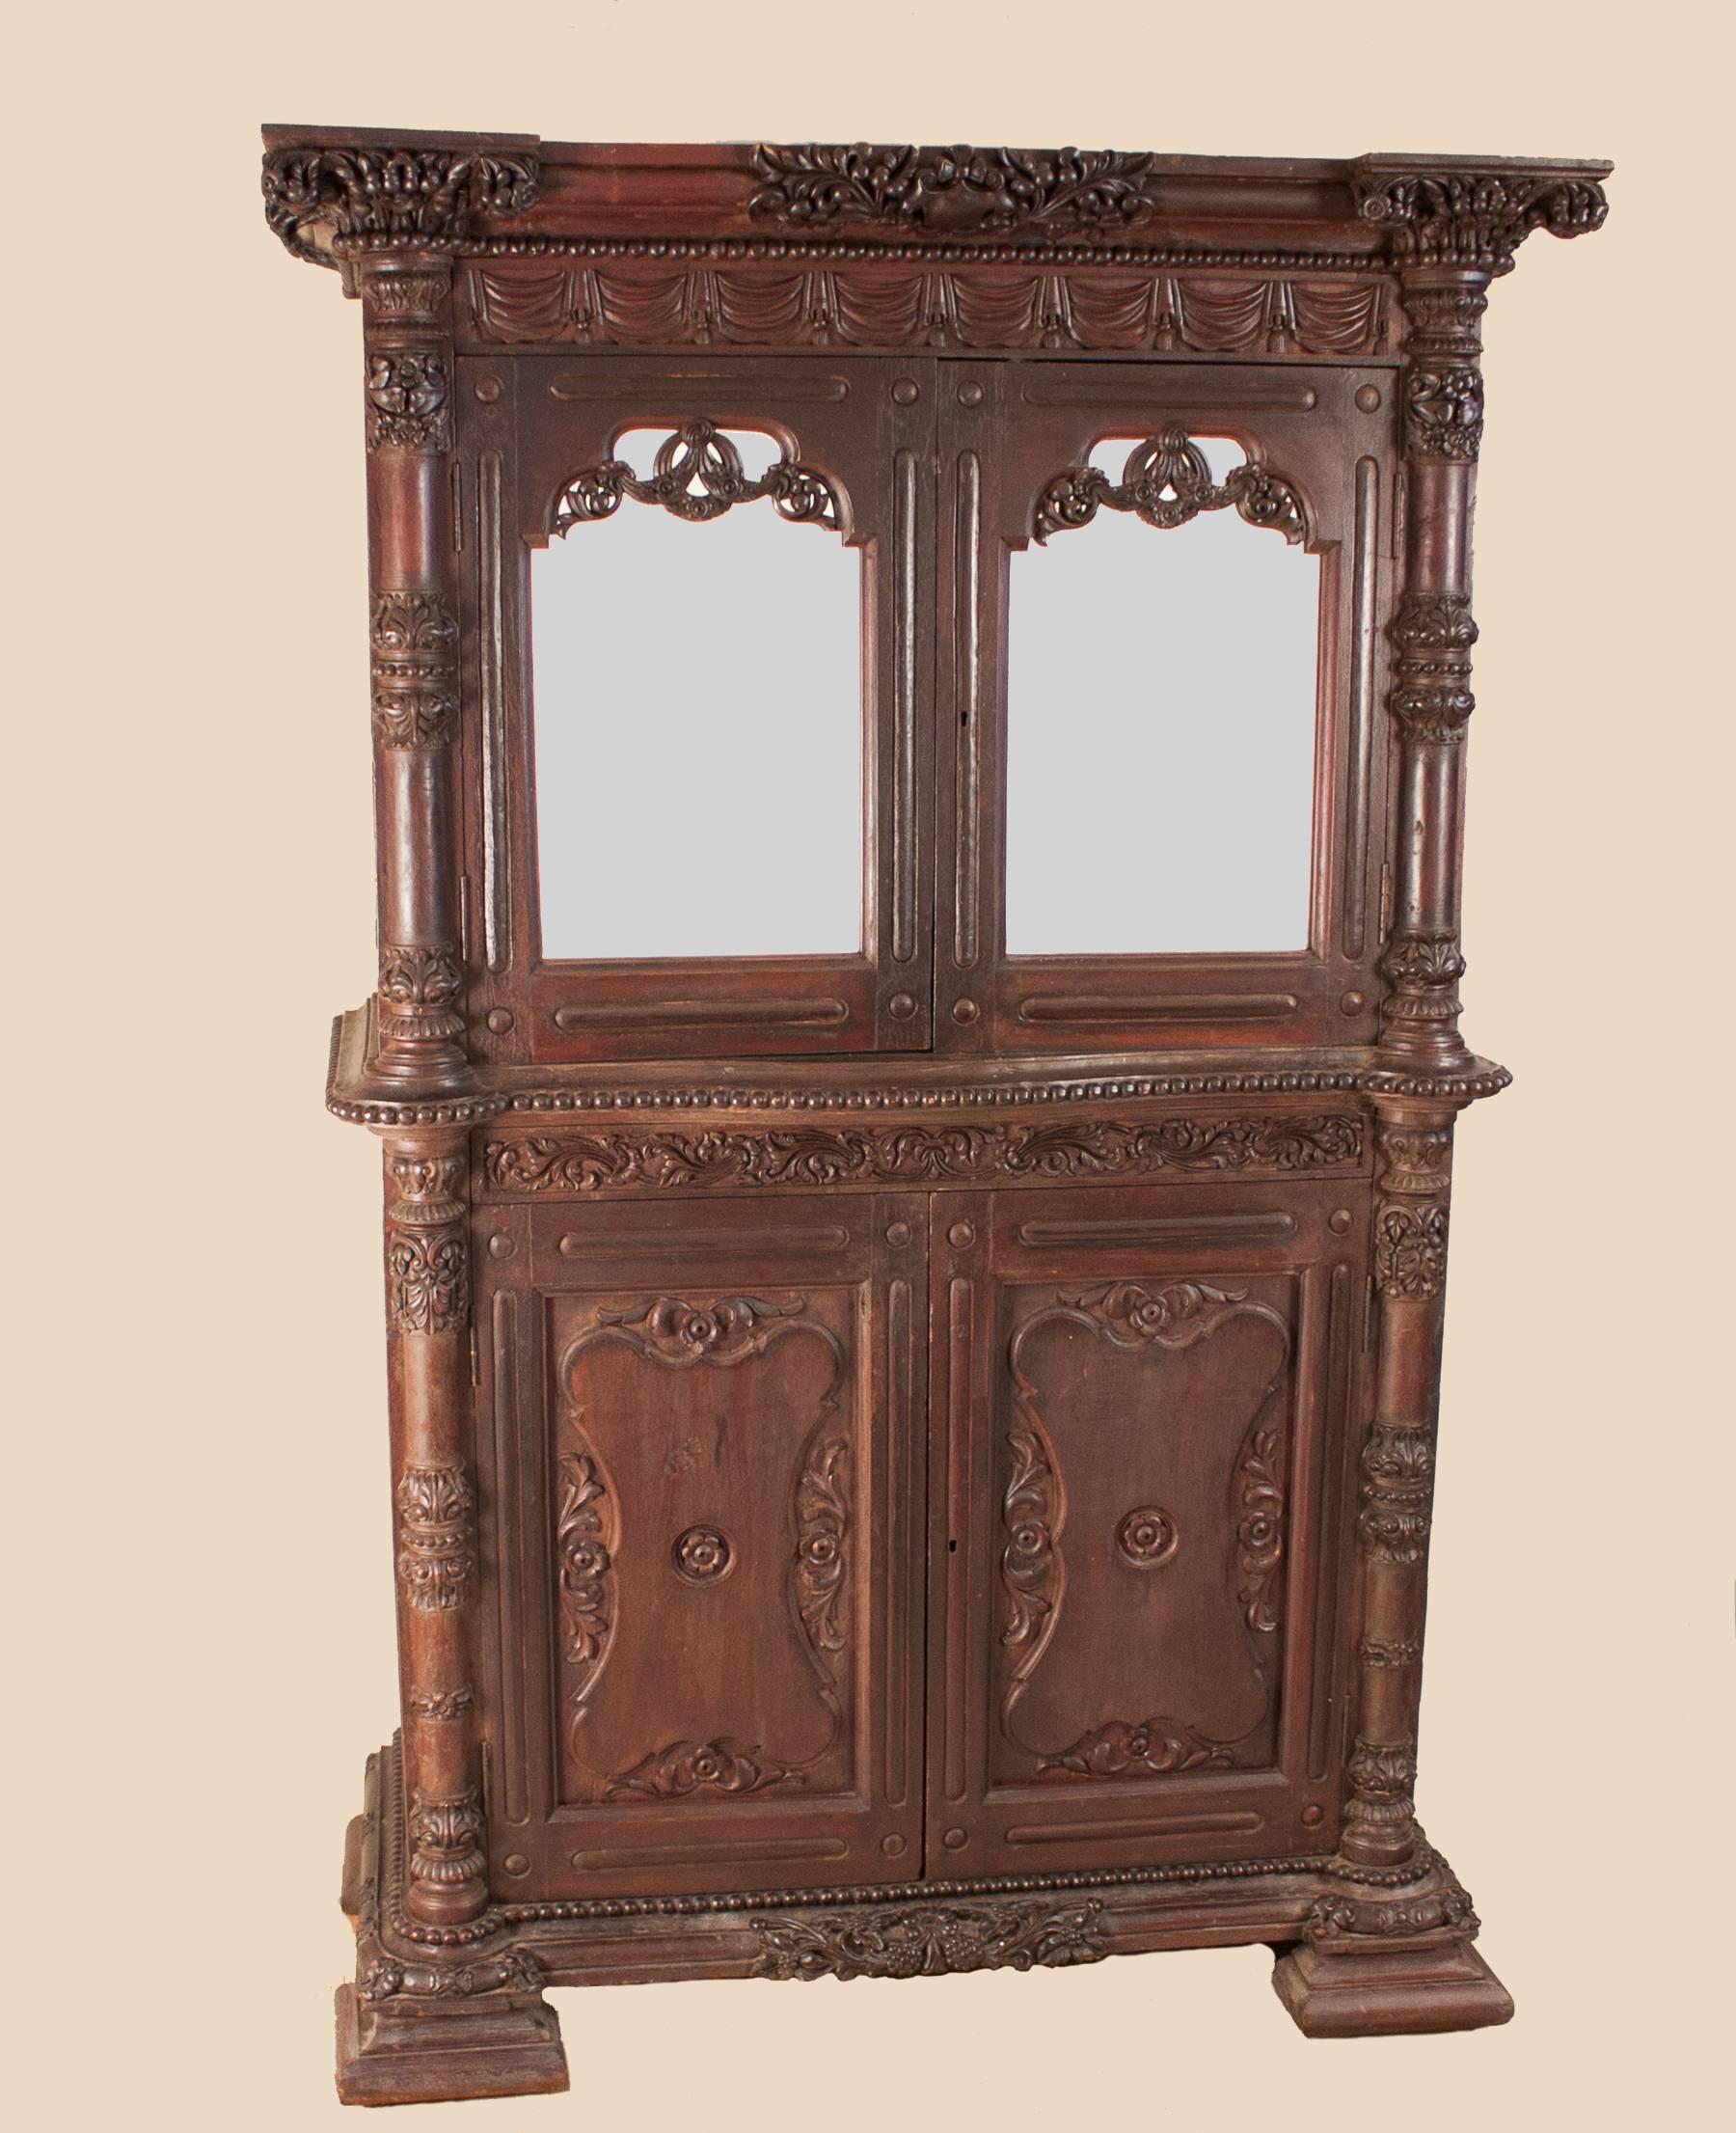 An ornately hand-carved teak wood cabinet from British India, circa 1875. In original condition, this richly colored hutch features four doors (two mirrored) and four spacious shelves inside. The piece is flanked by columns with carved capitals and